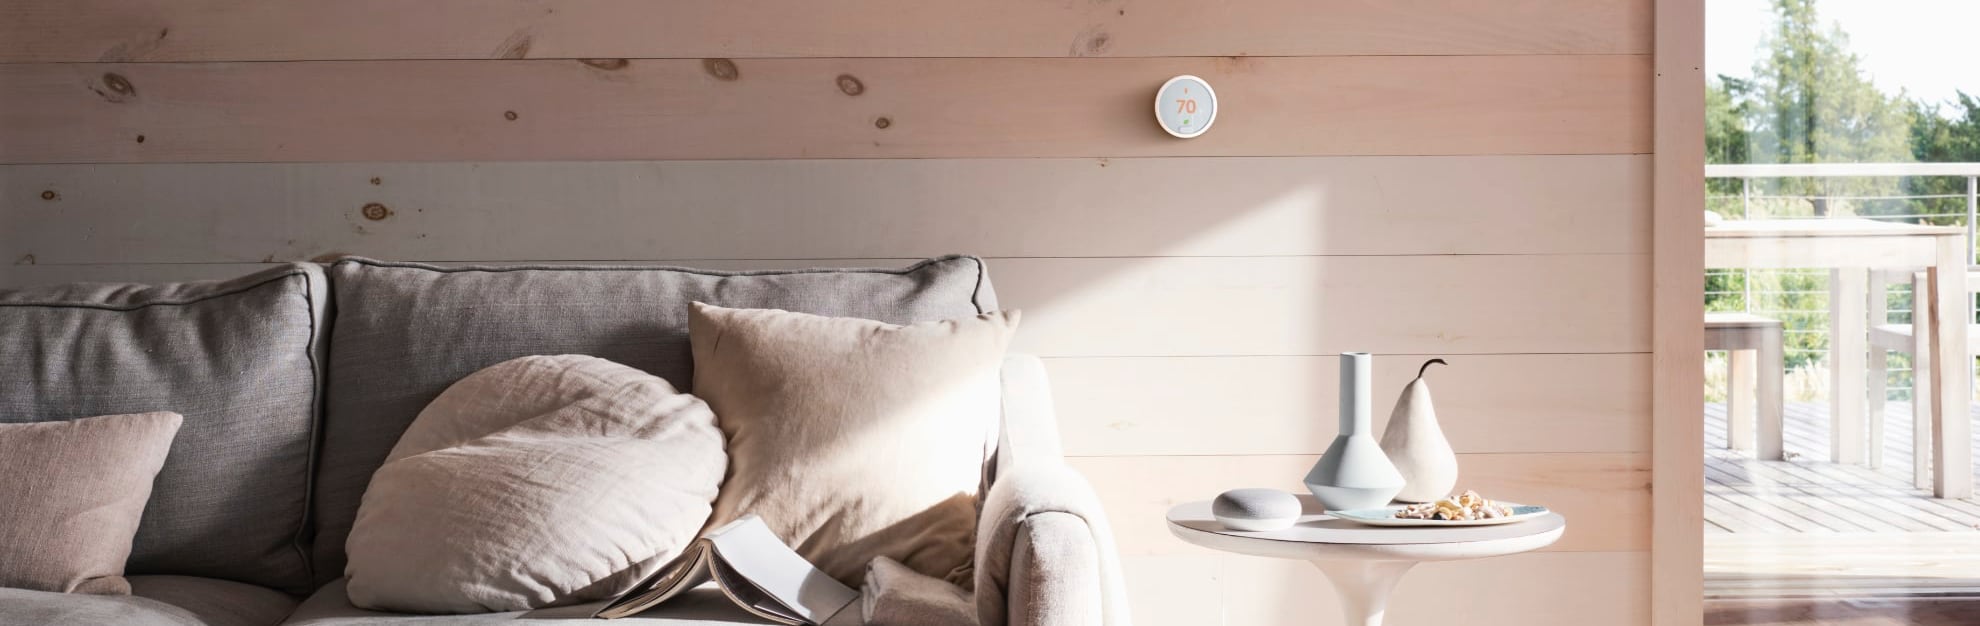 Vivint Home Automation in Fort Myers